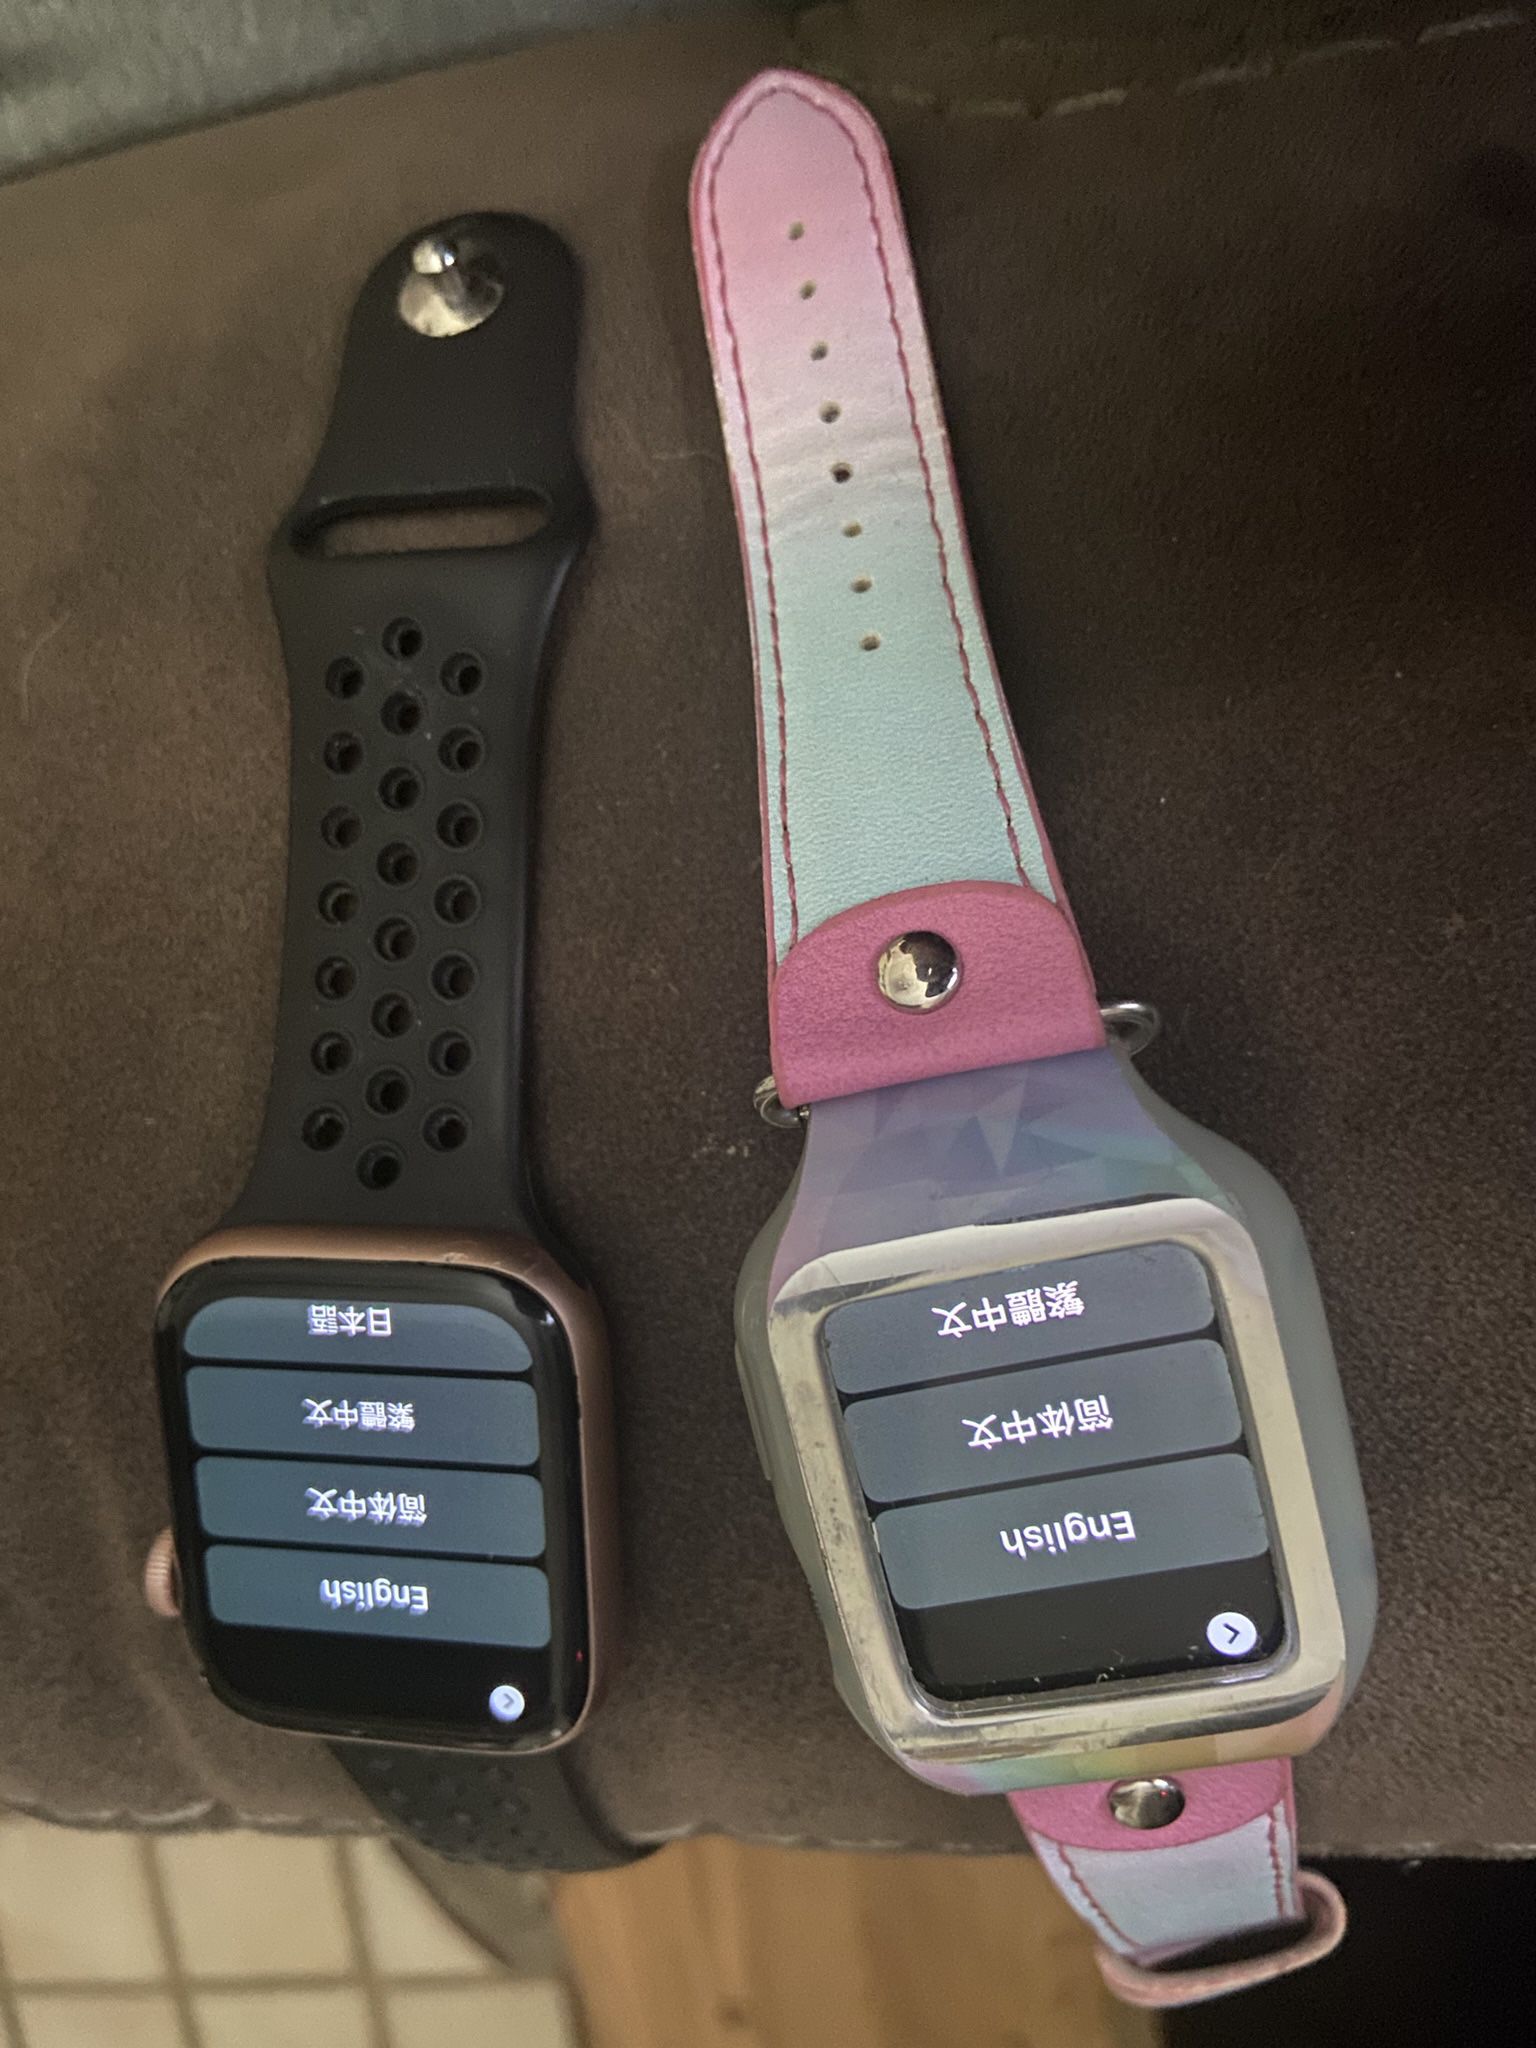 2 Apple Watches With cases